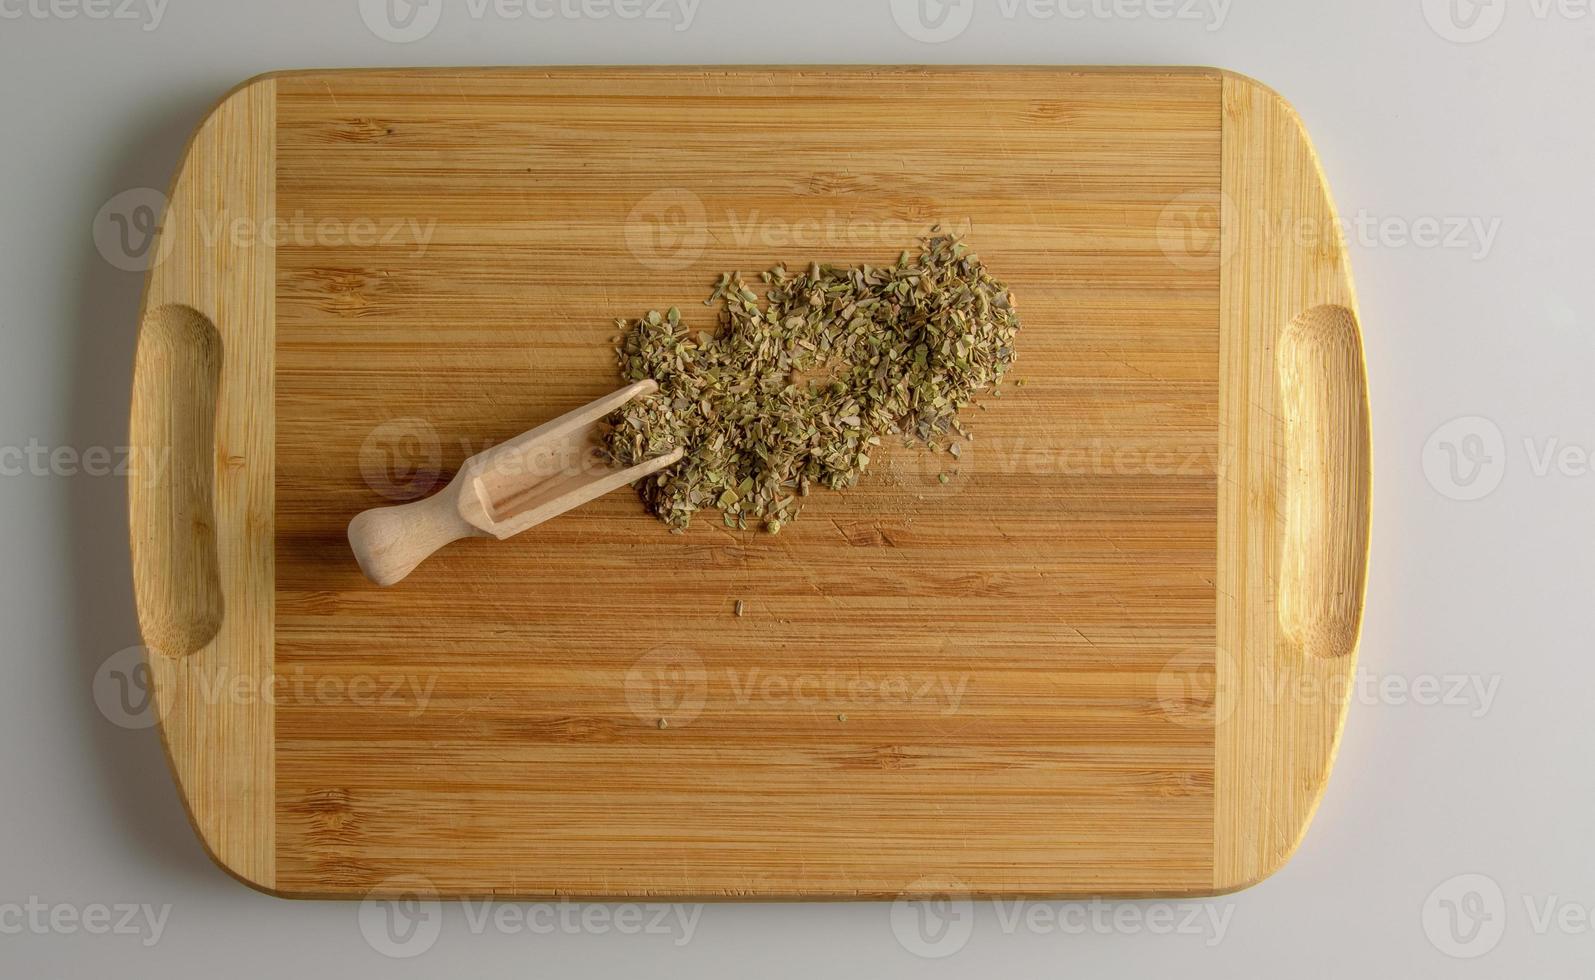 Spice oregano or marjoram. Aromatic spice for food. Background of dried oregano or marjoram on a wooden kitchen board with a measuring spoon. photo